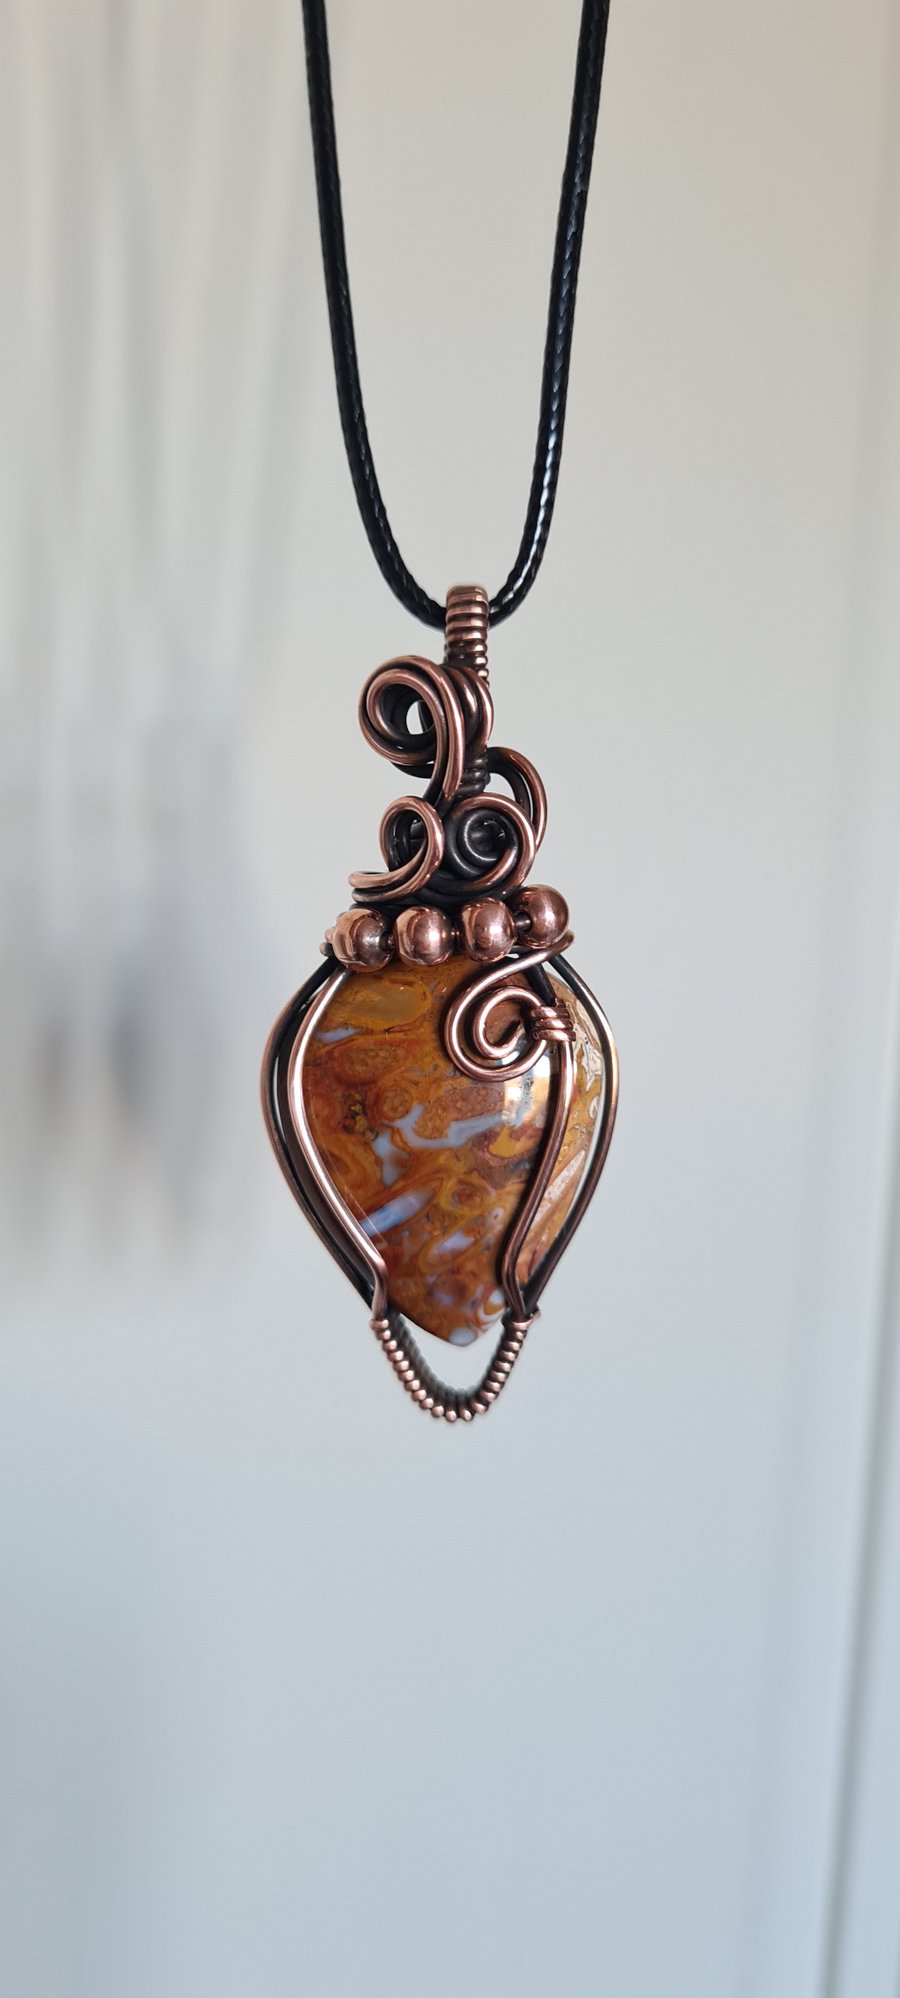 Handmade Natural Plume Agate & Copper Necklace Pendant Crystal Jewellery Gift